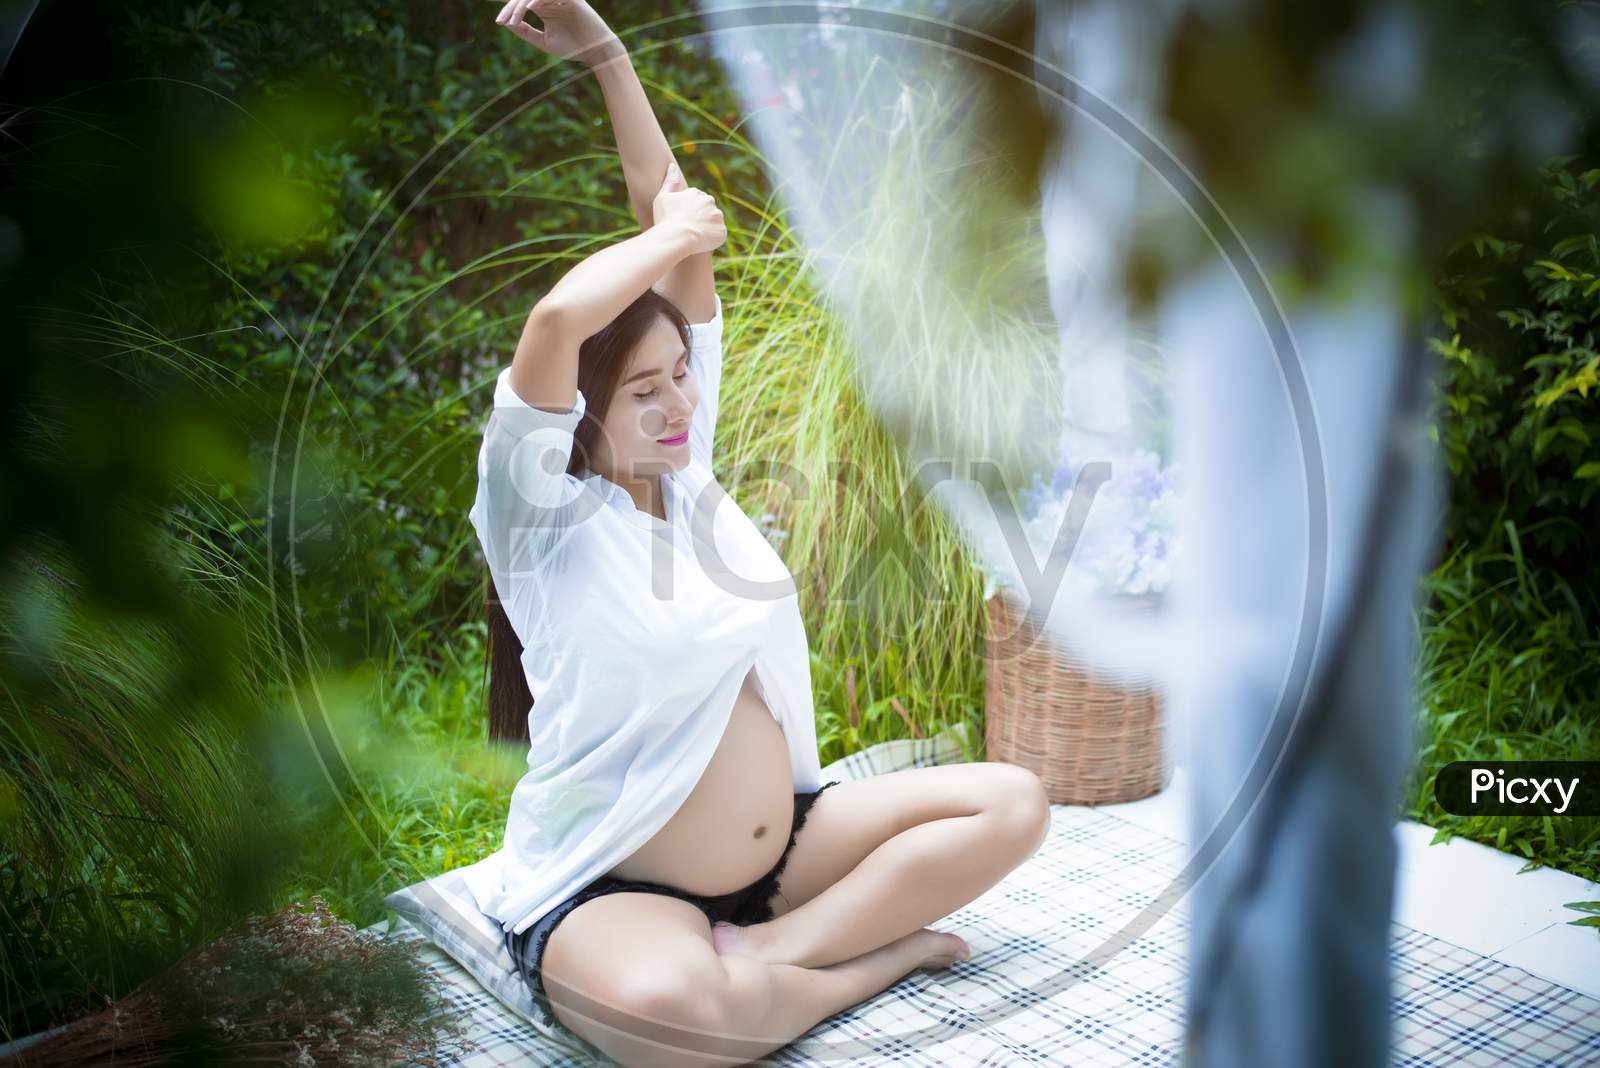 Pregnant Woman Doing Yoga At The Outdoor